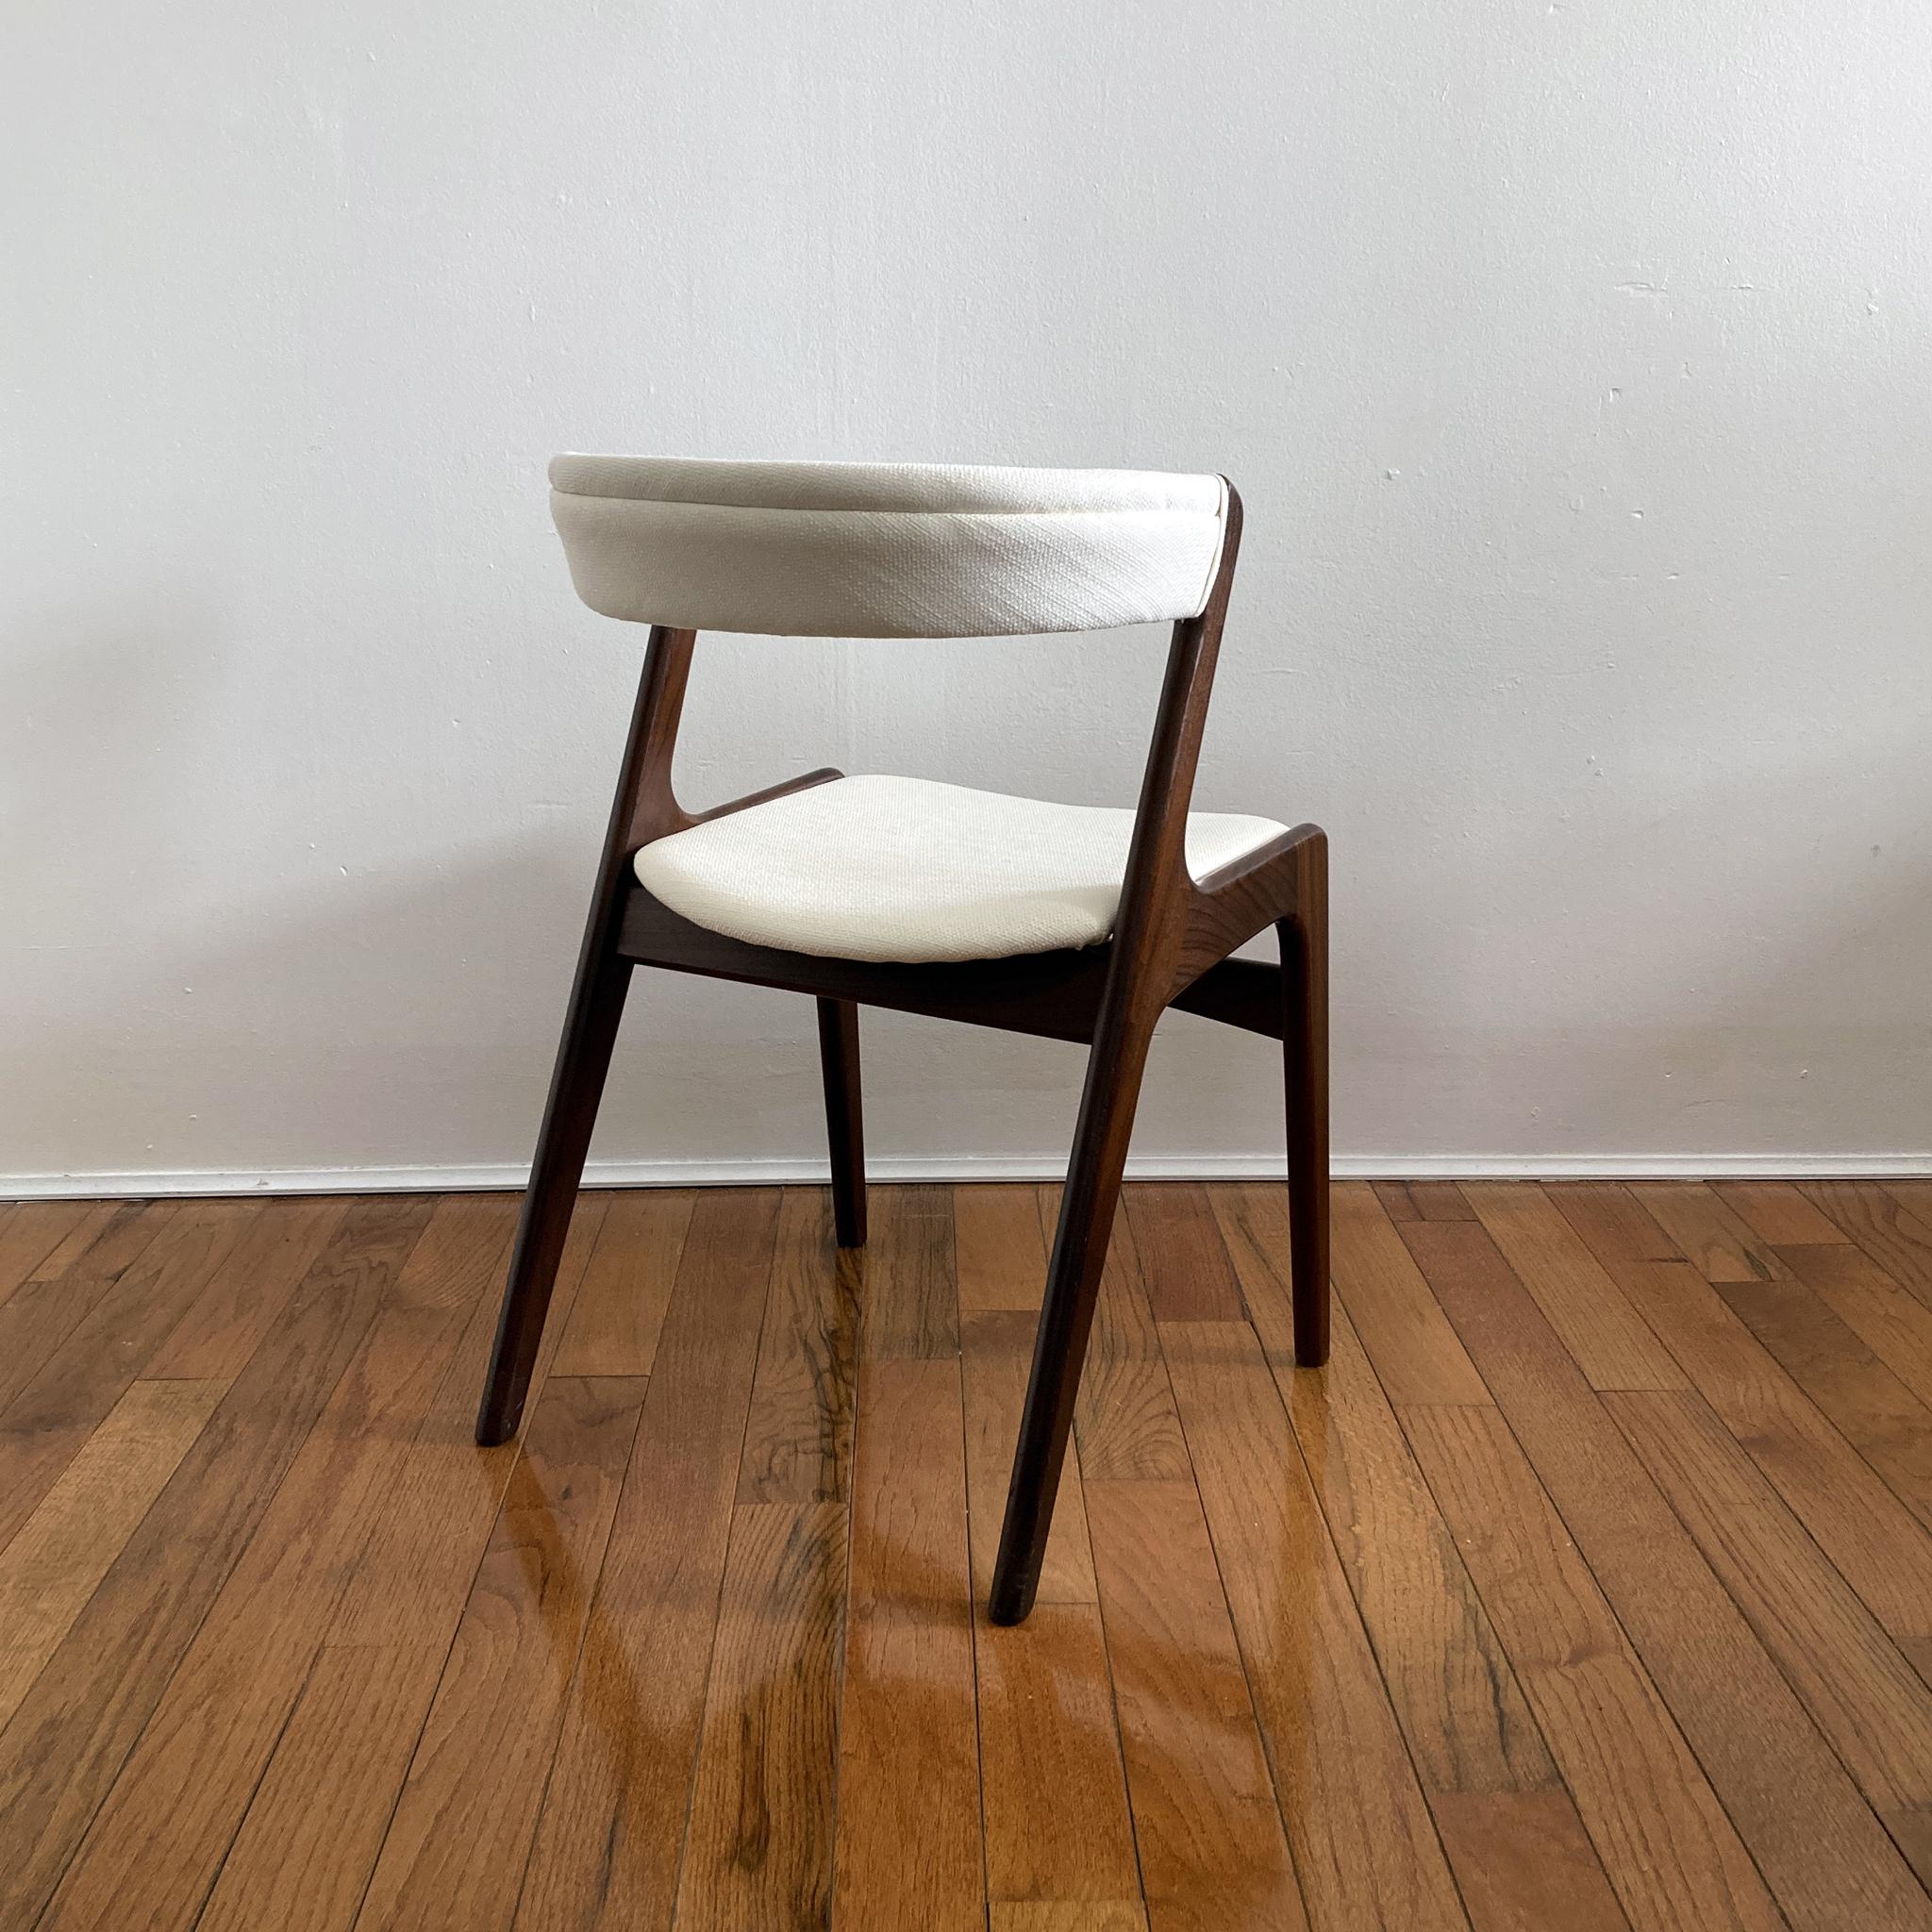 Kai Kristiansen Ivory Tweed Curved Back Teak Chairs, Danish, 1960s, Pair of Two For Sale 1